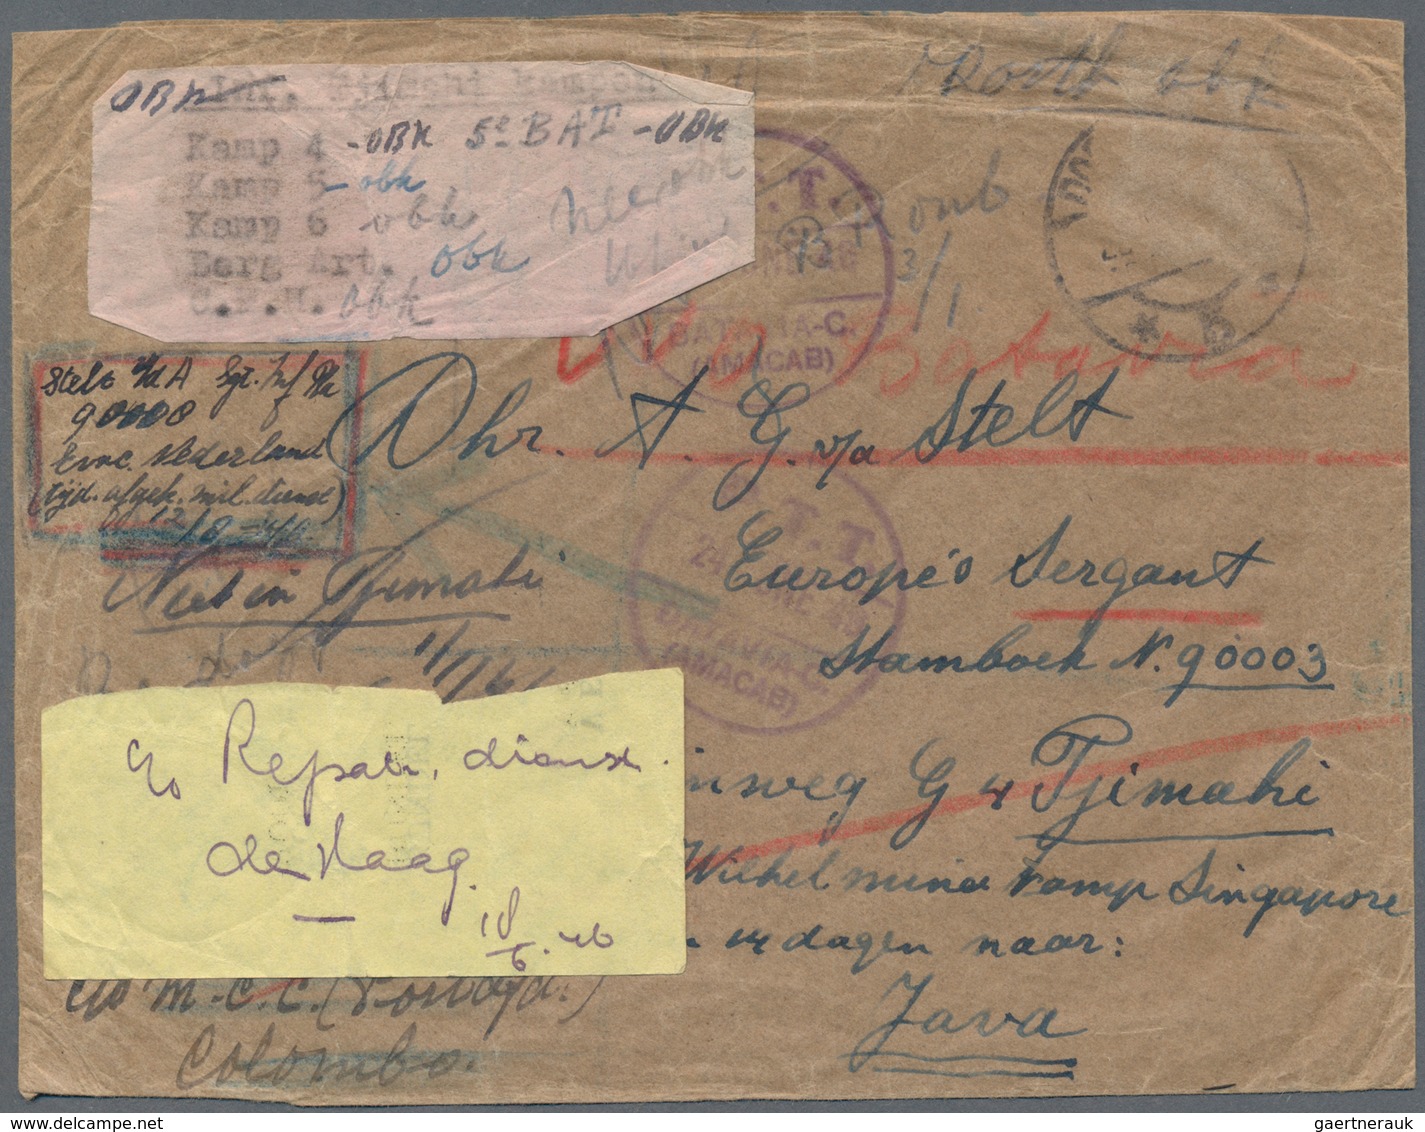 Niederländisch-Indien: 1862/1946, covers/used ppc (20), stationery (22) inc. airmail, registration,